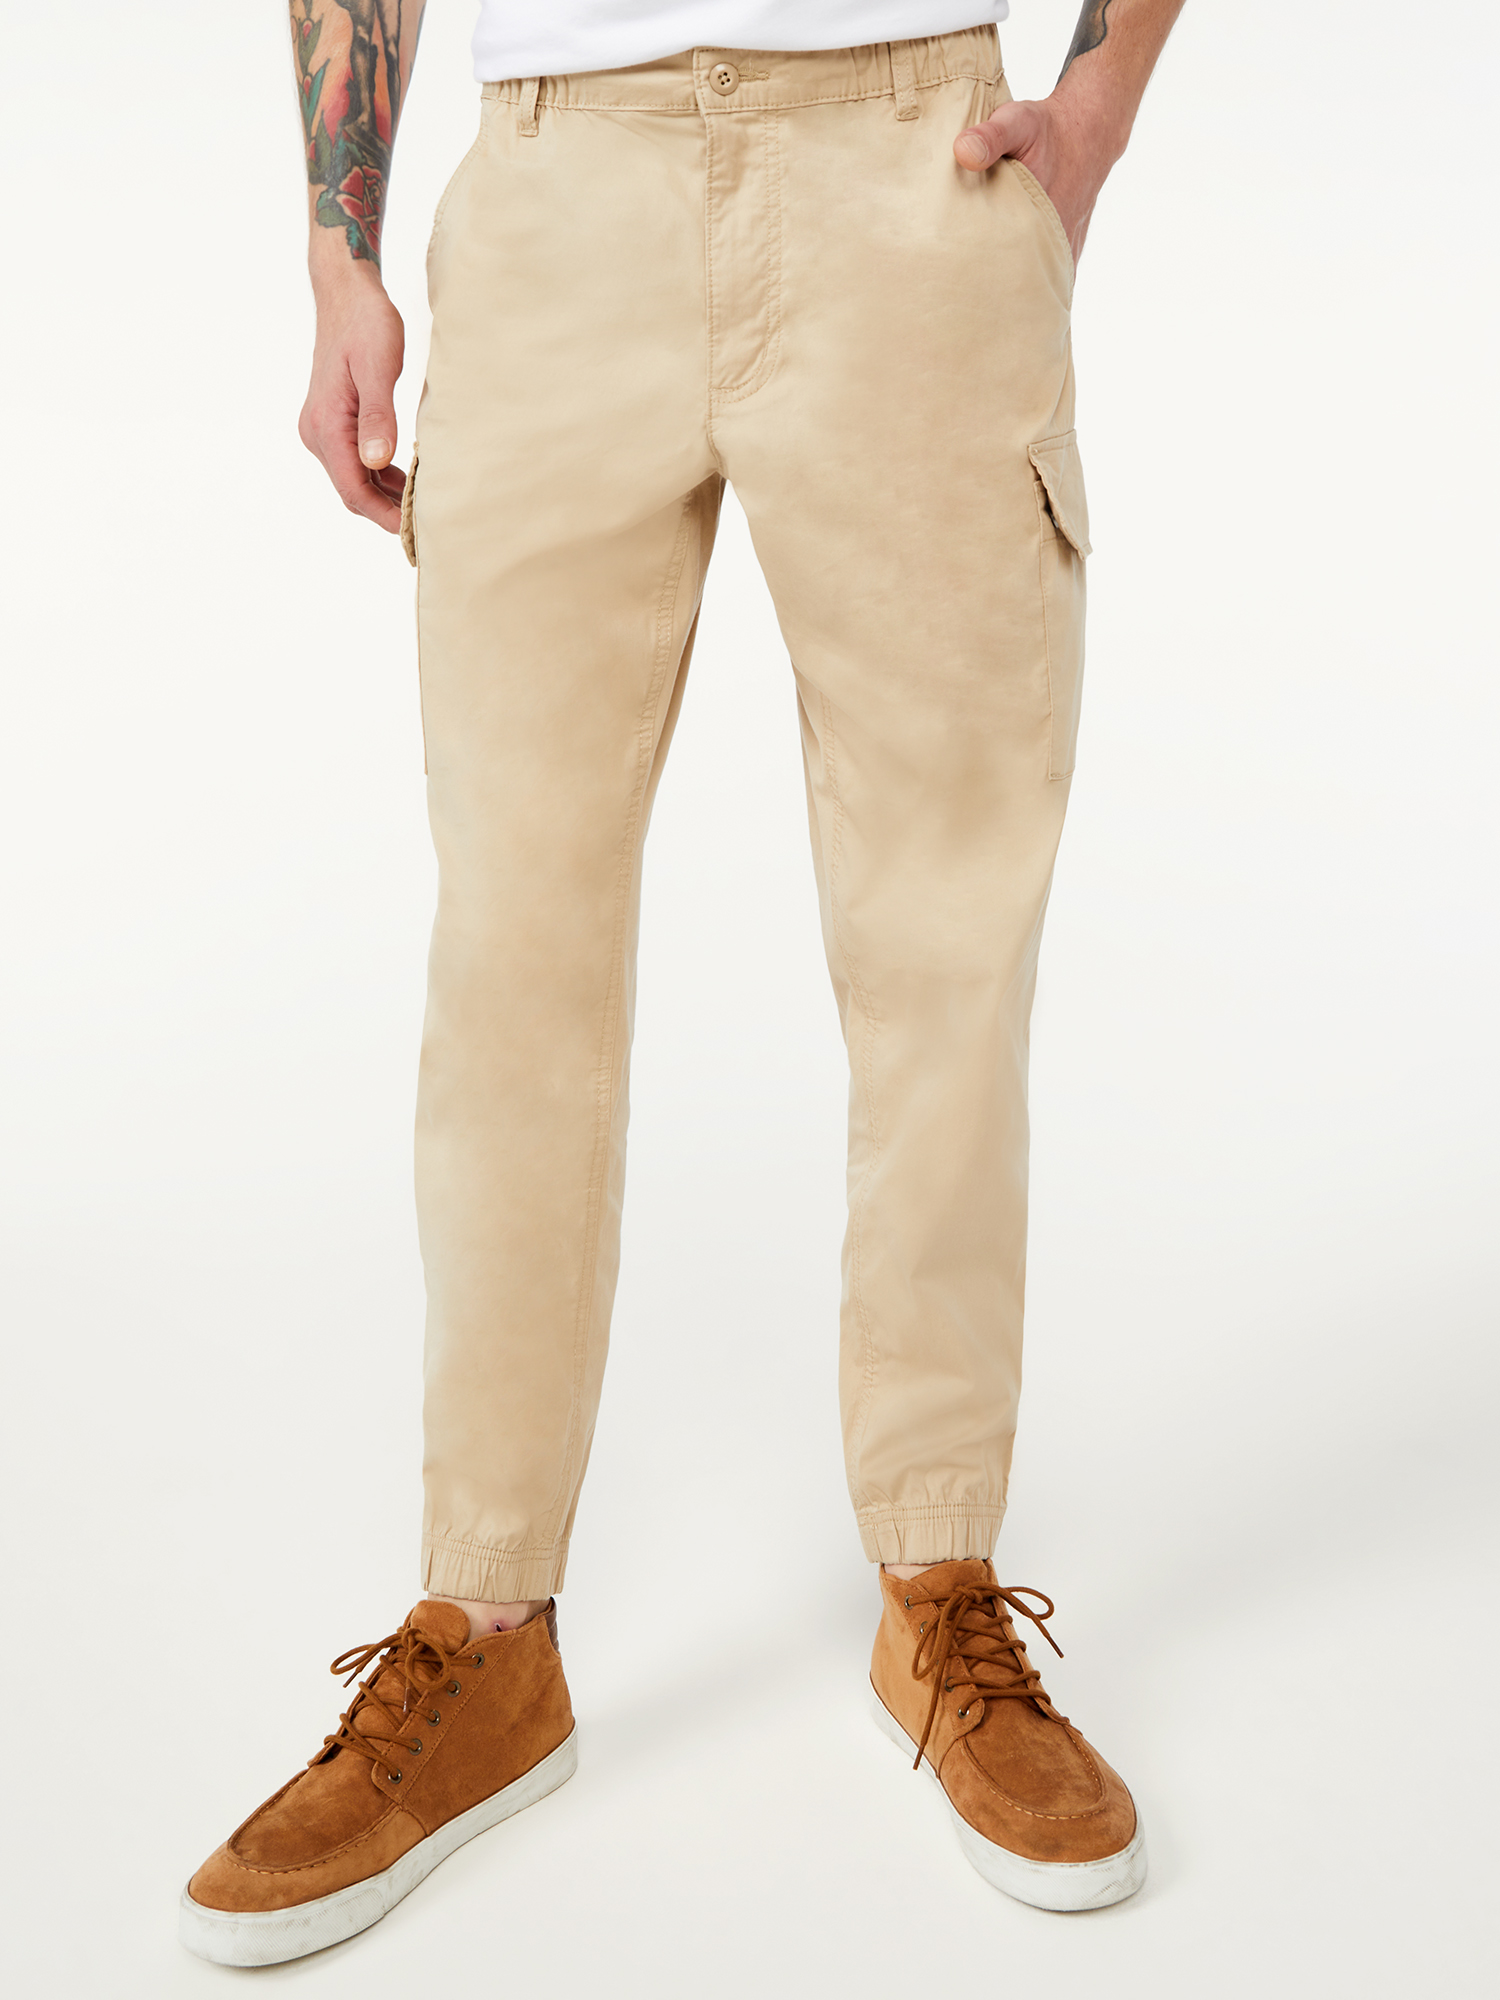 Free Assembly Men’s E-Waist Cargo Joggers - image 1 of 5